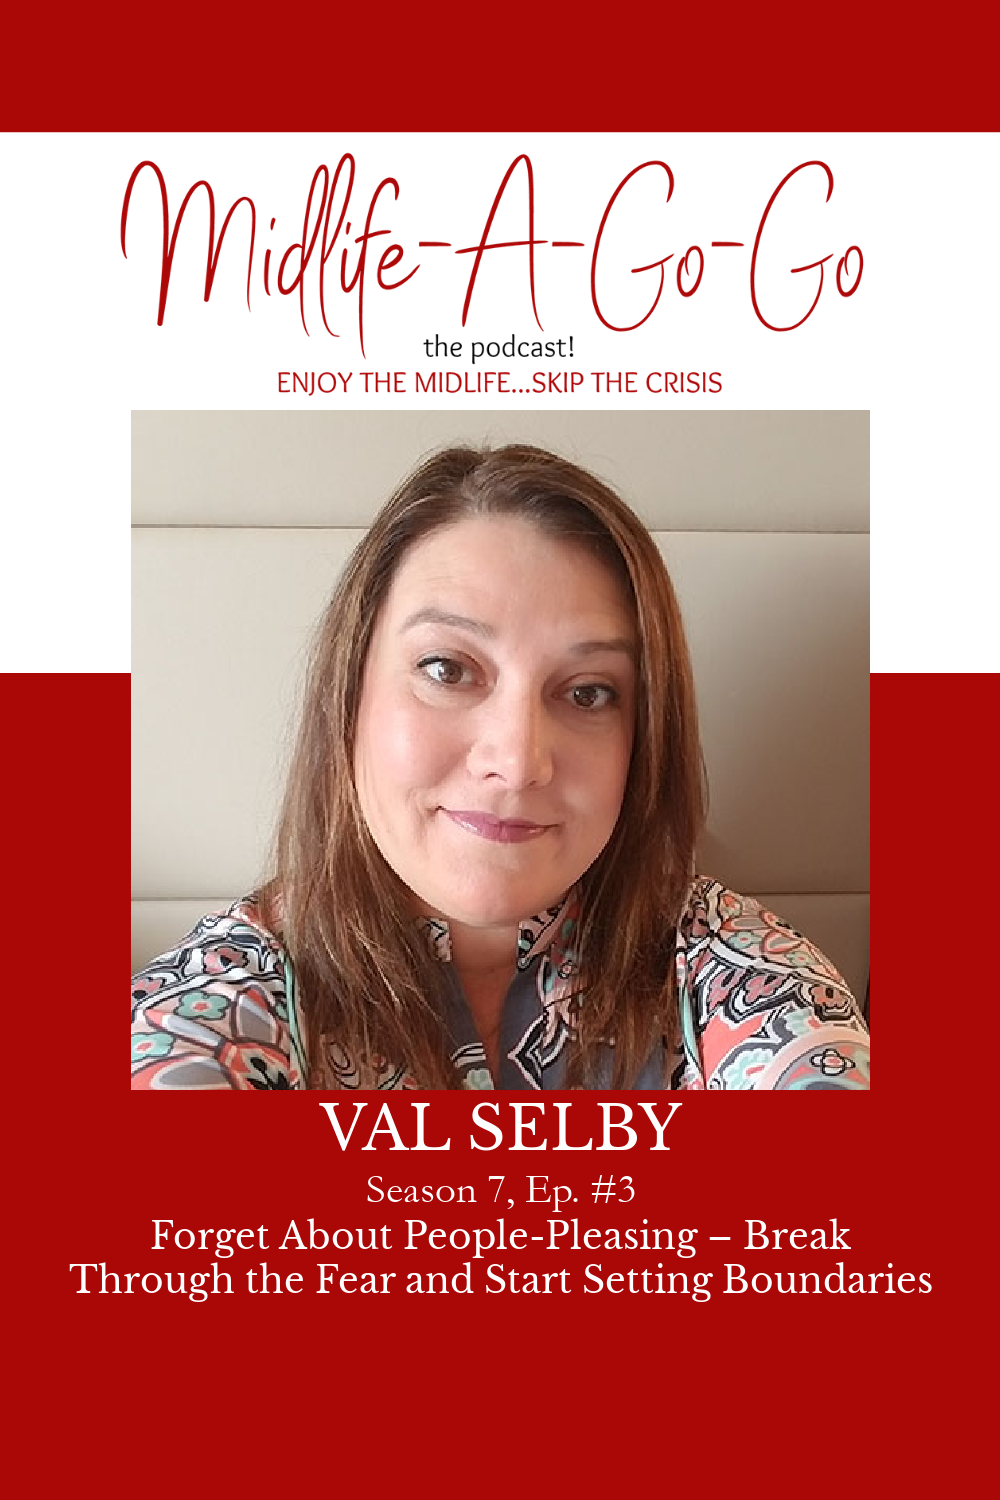 Break Through the Fear and Start Setting Boundaries w/Val Selby